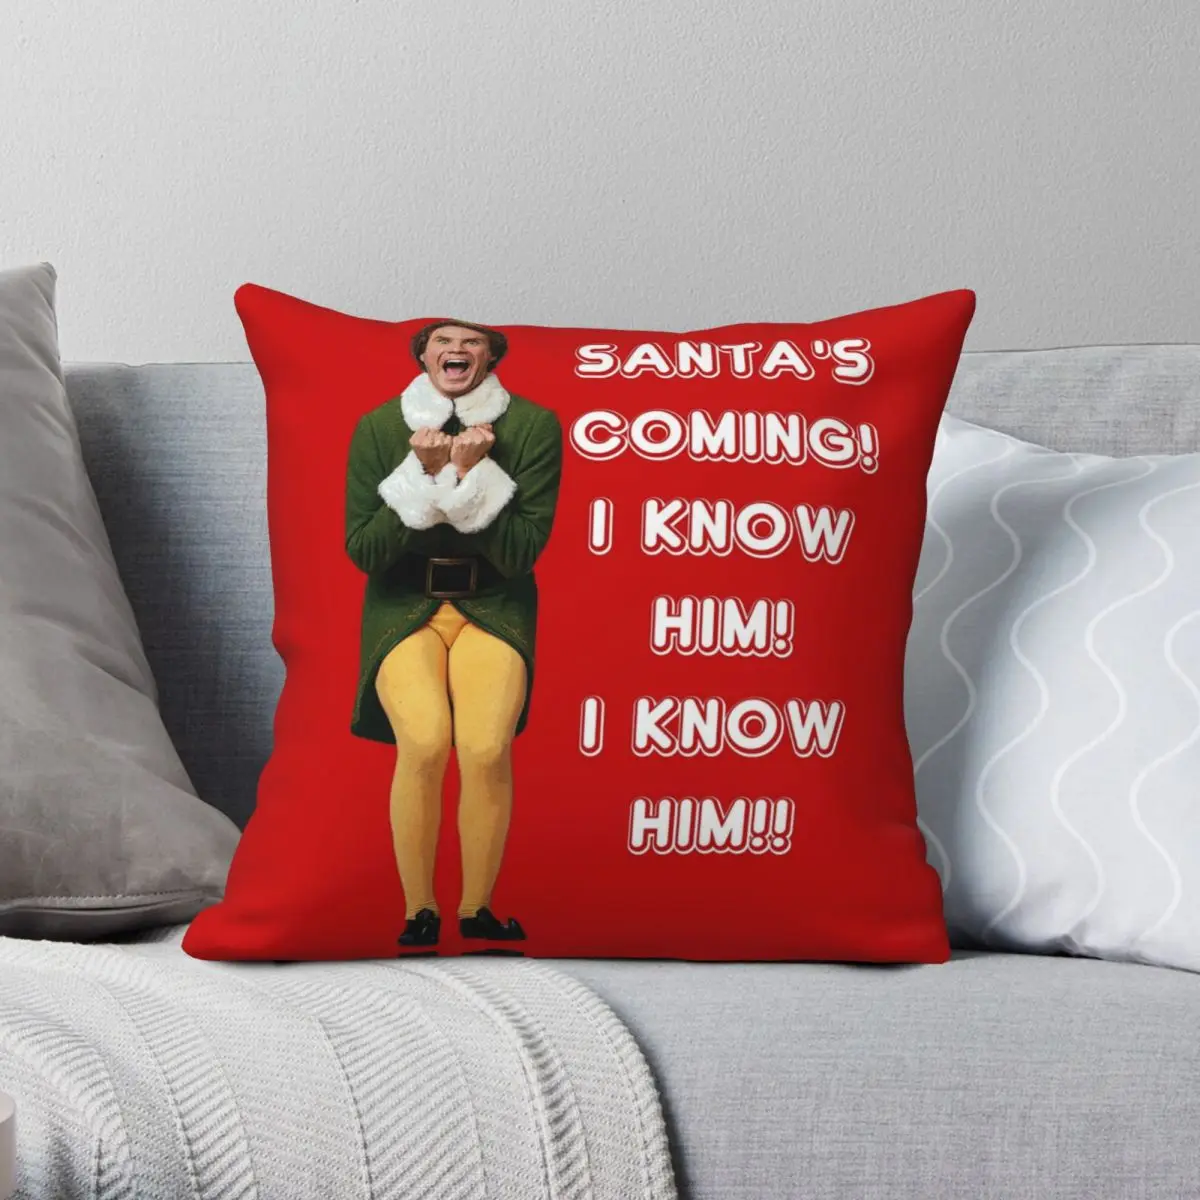 

SANTA'S COMING I KNOW HIM Elf The Movie Square Pillowcase Polyester Linen Velvet Pattern Zip Decorative Bed Cushion Cover